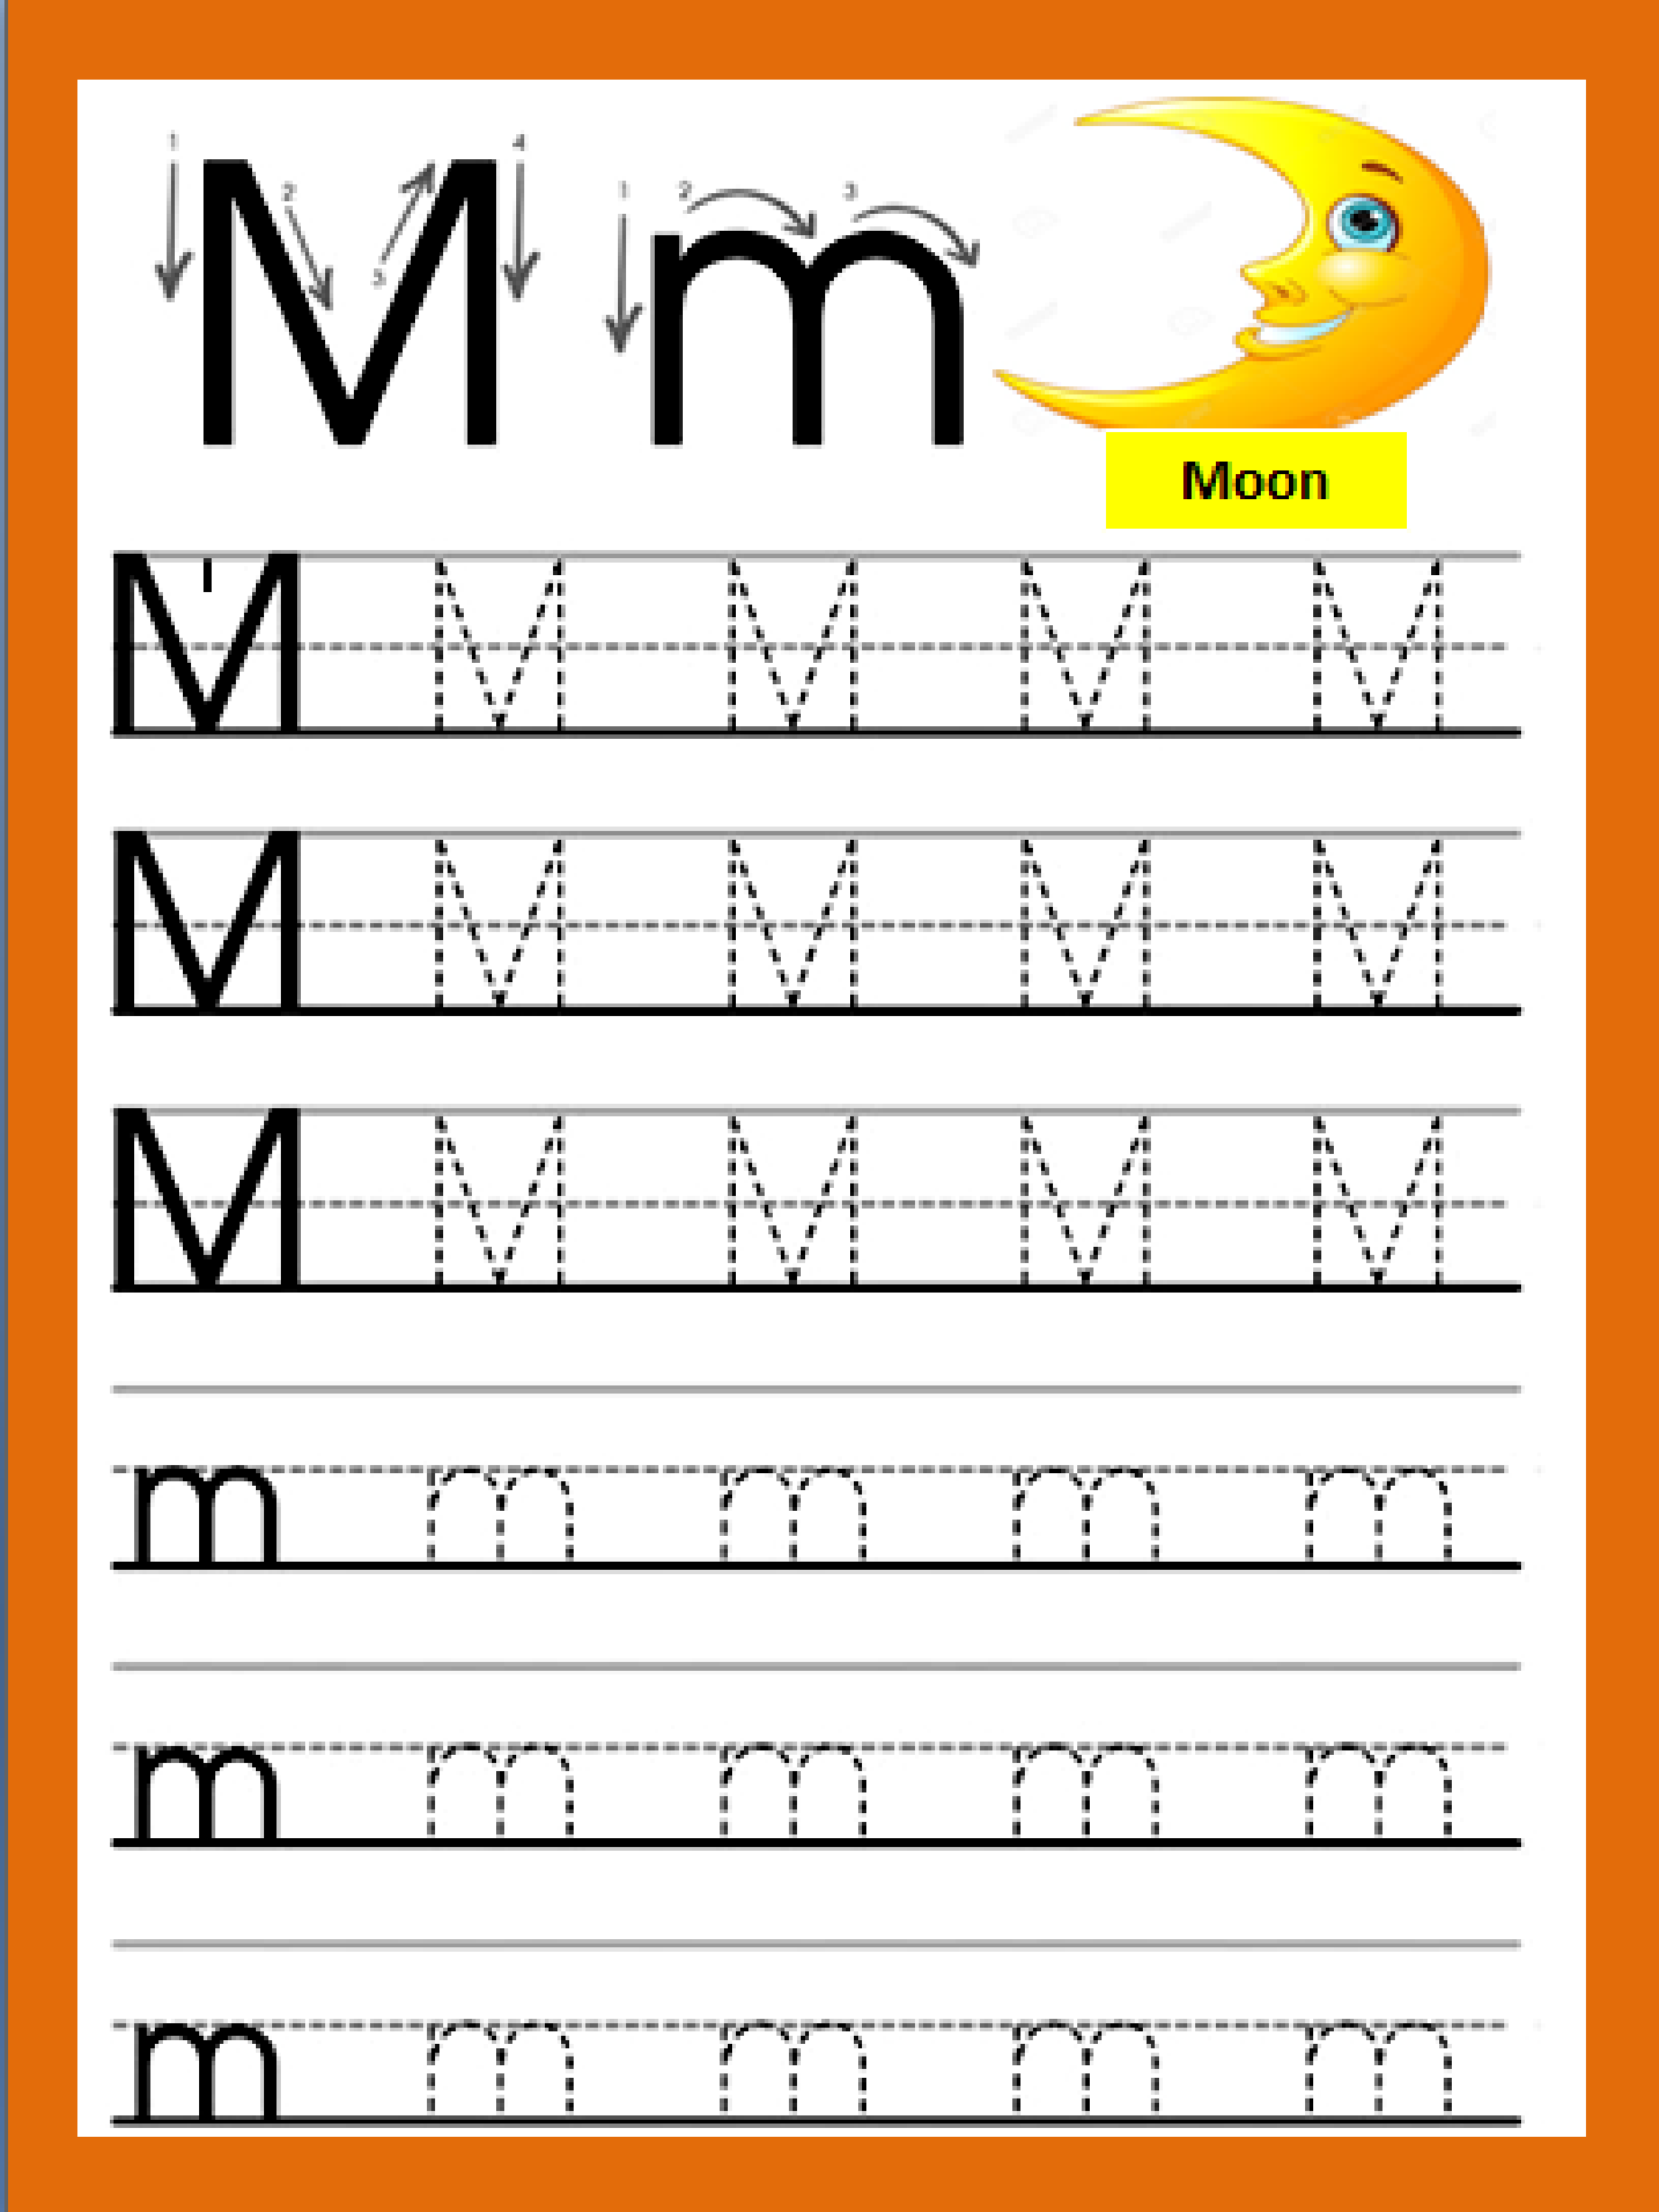 Letter Mm In 2021 Handwriting Worksheets For Kids Tracing Worksheets 